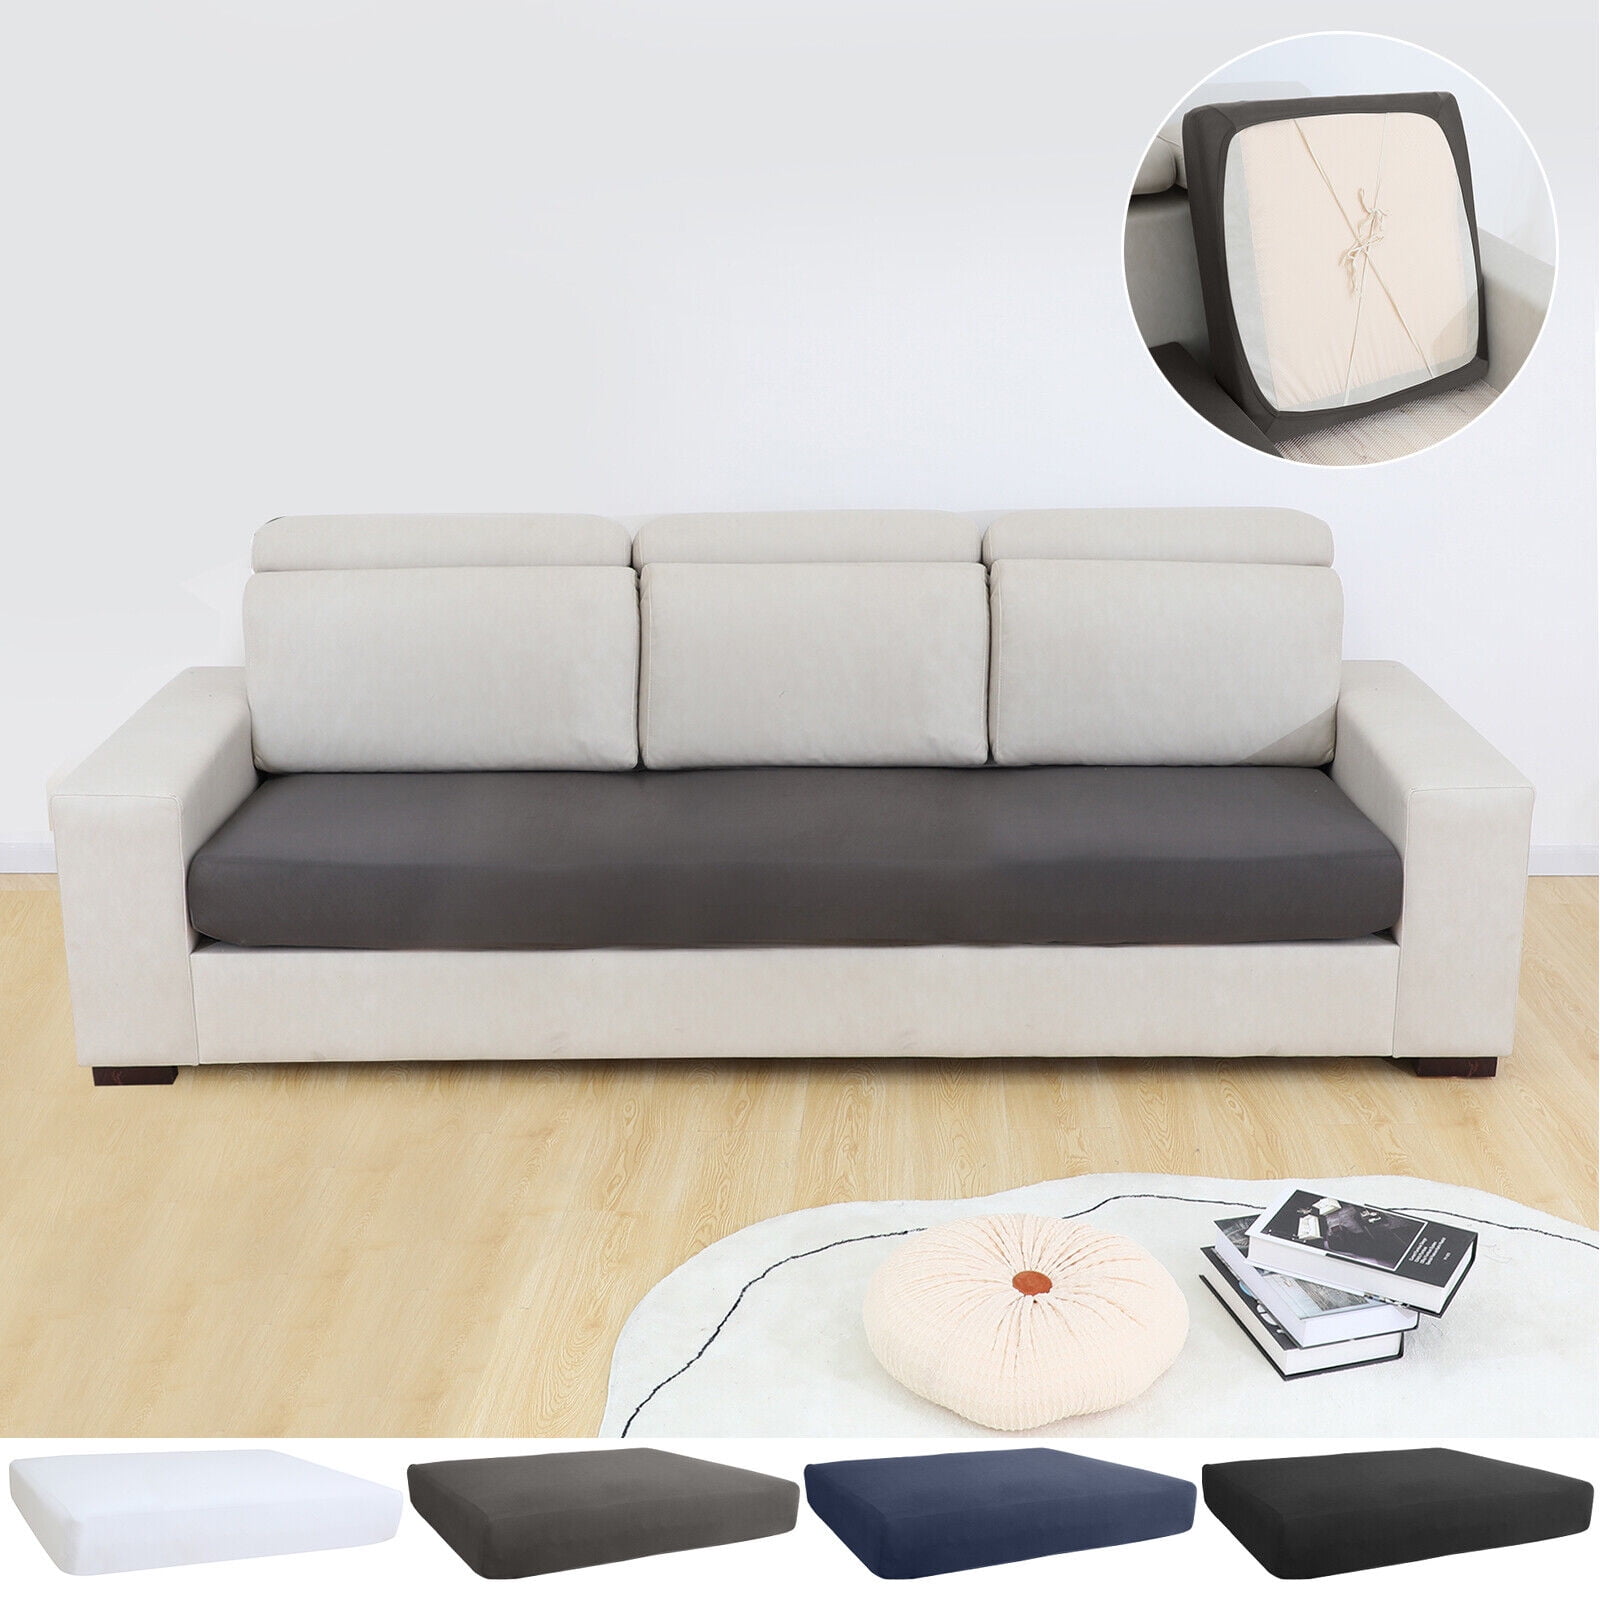  Product Trend Furniture Fix Steel for Chair, Sofa